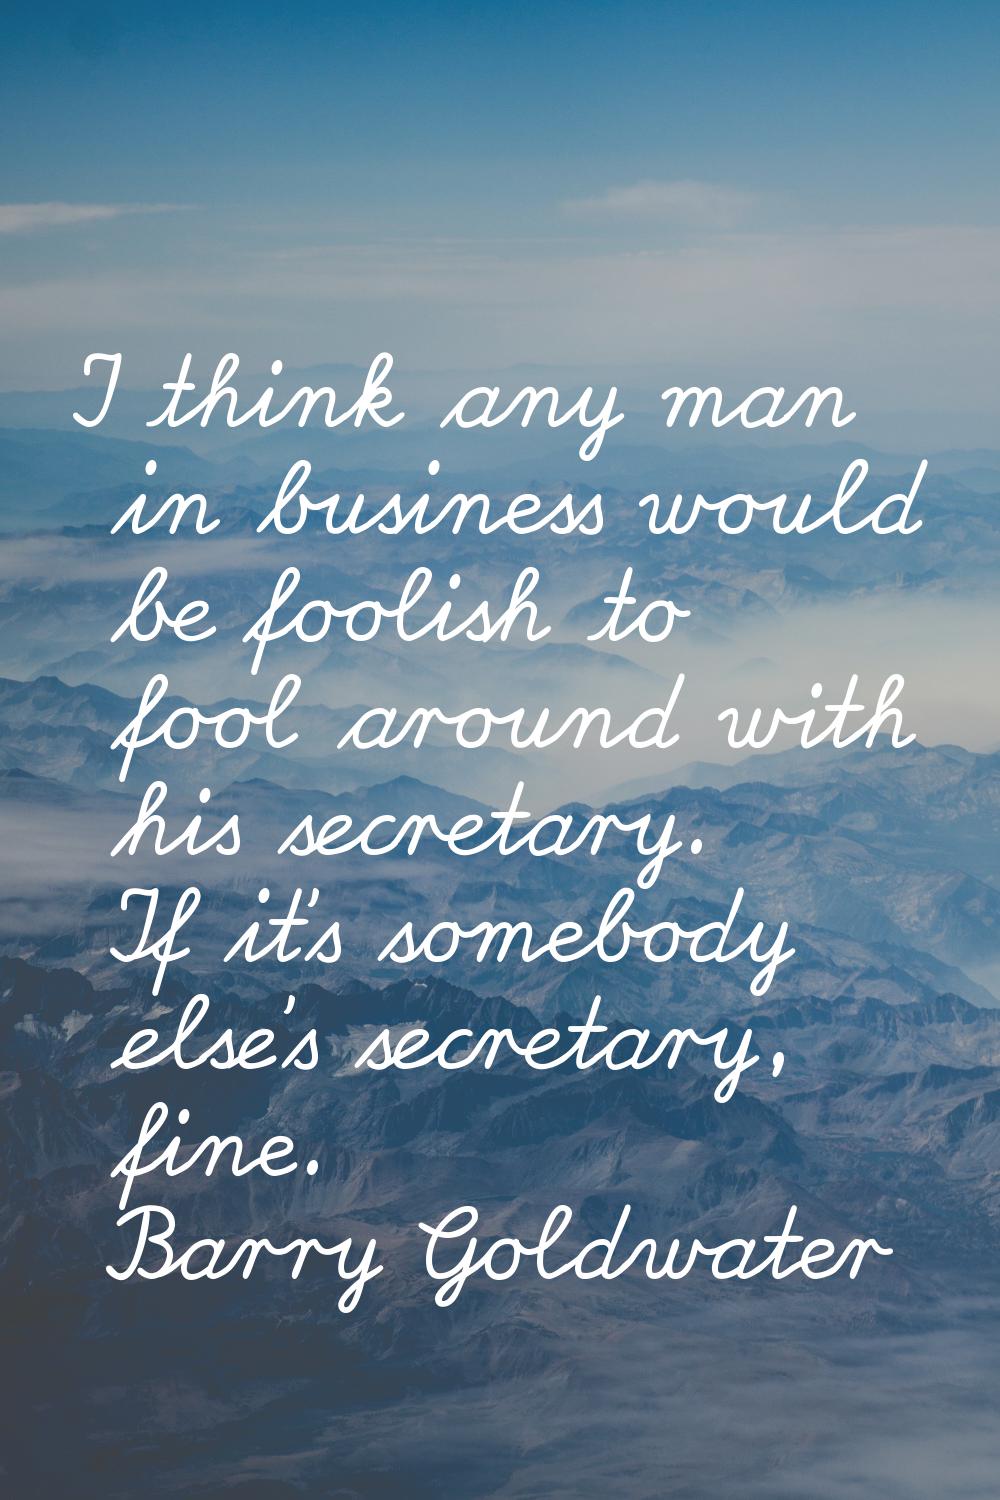 I think any man in business would be foolish to fool around with his secretary. If it's somebody el